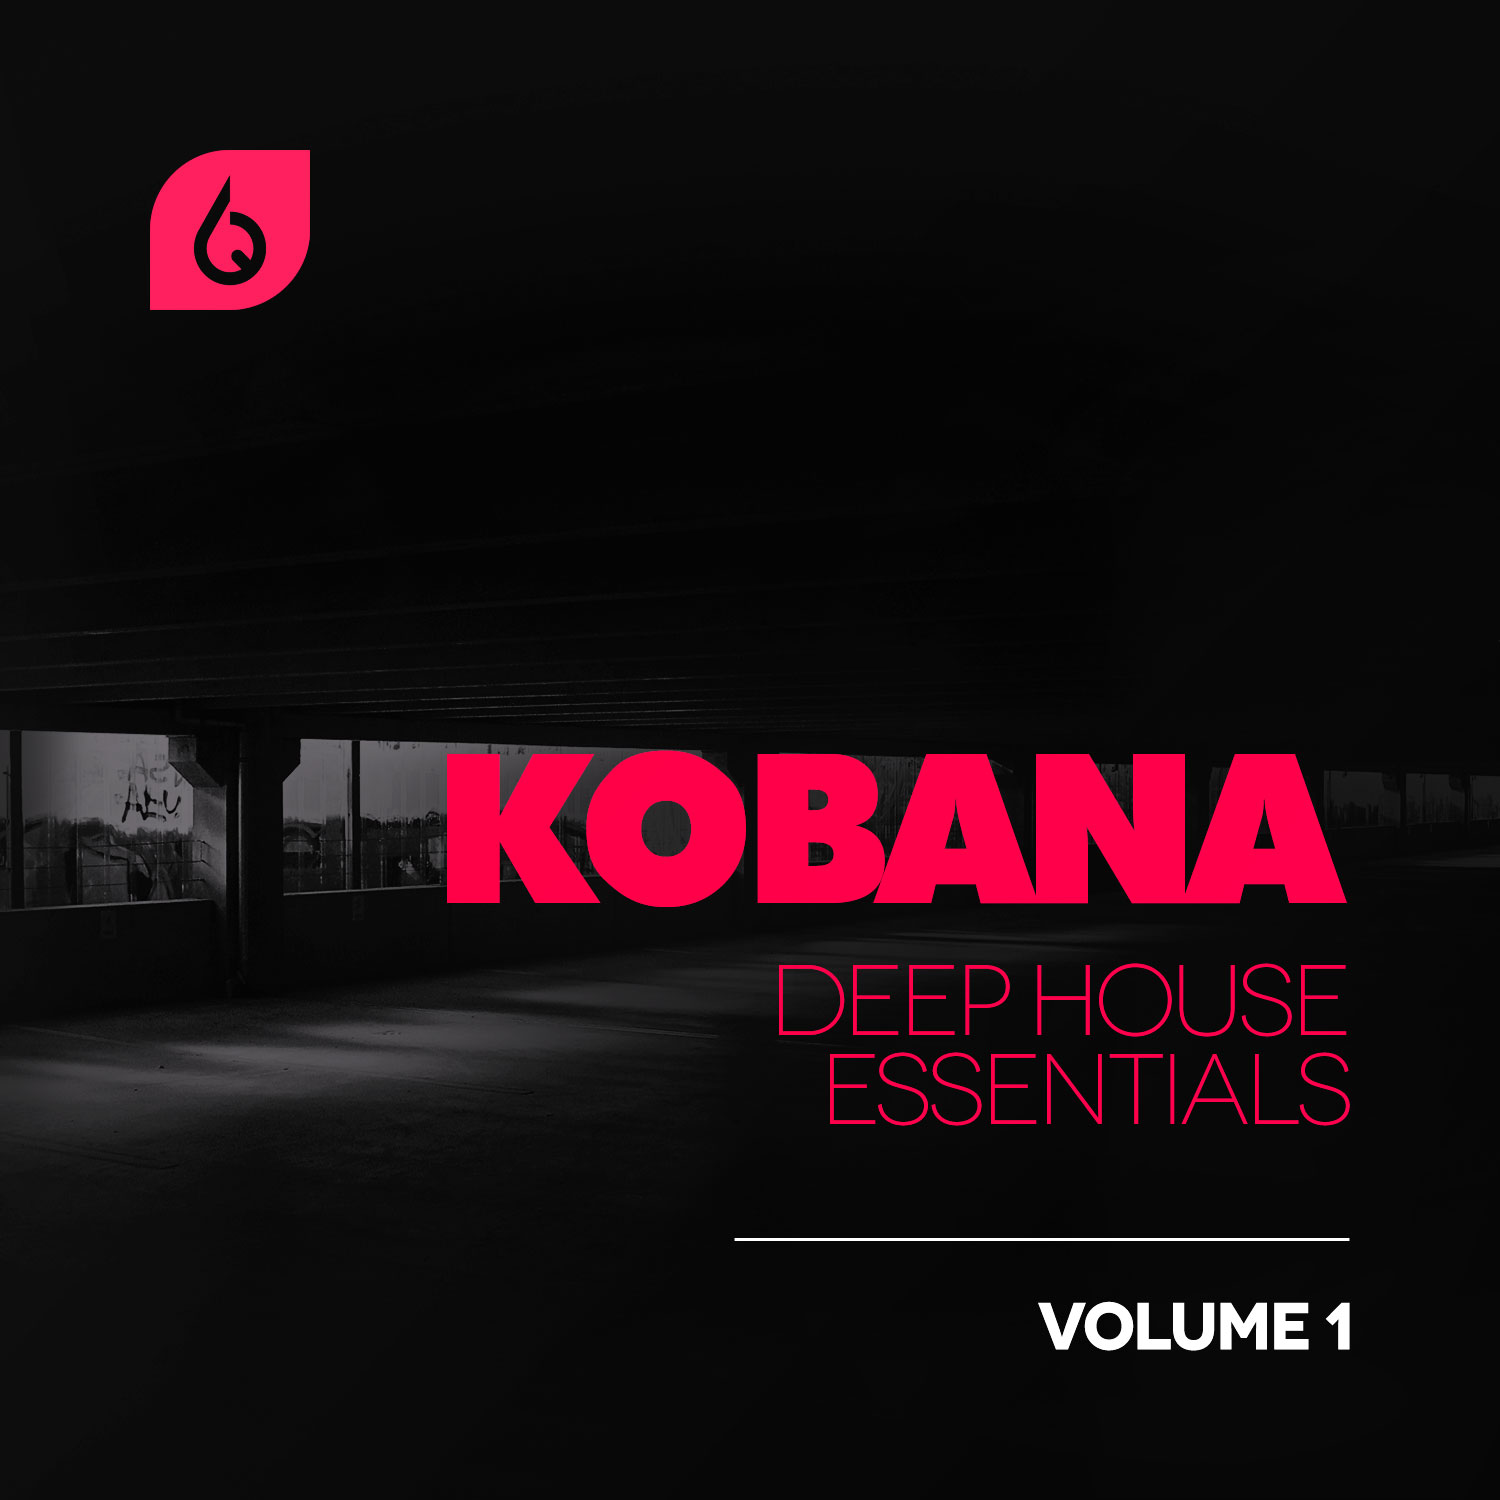 Vengeance Essential House Vol.4 download free